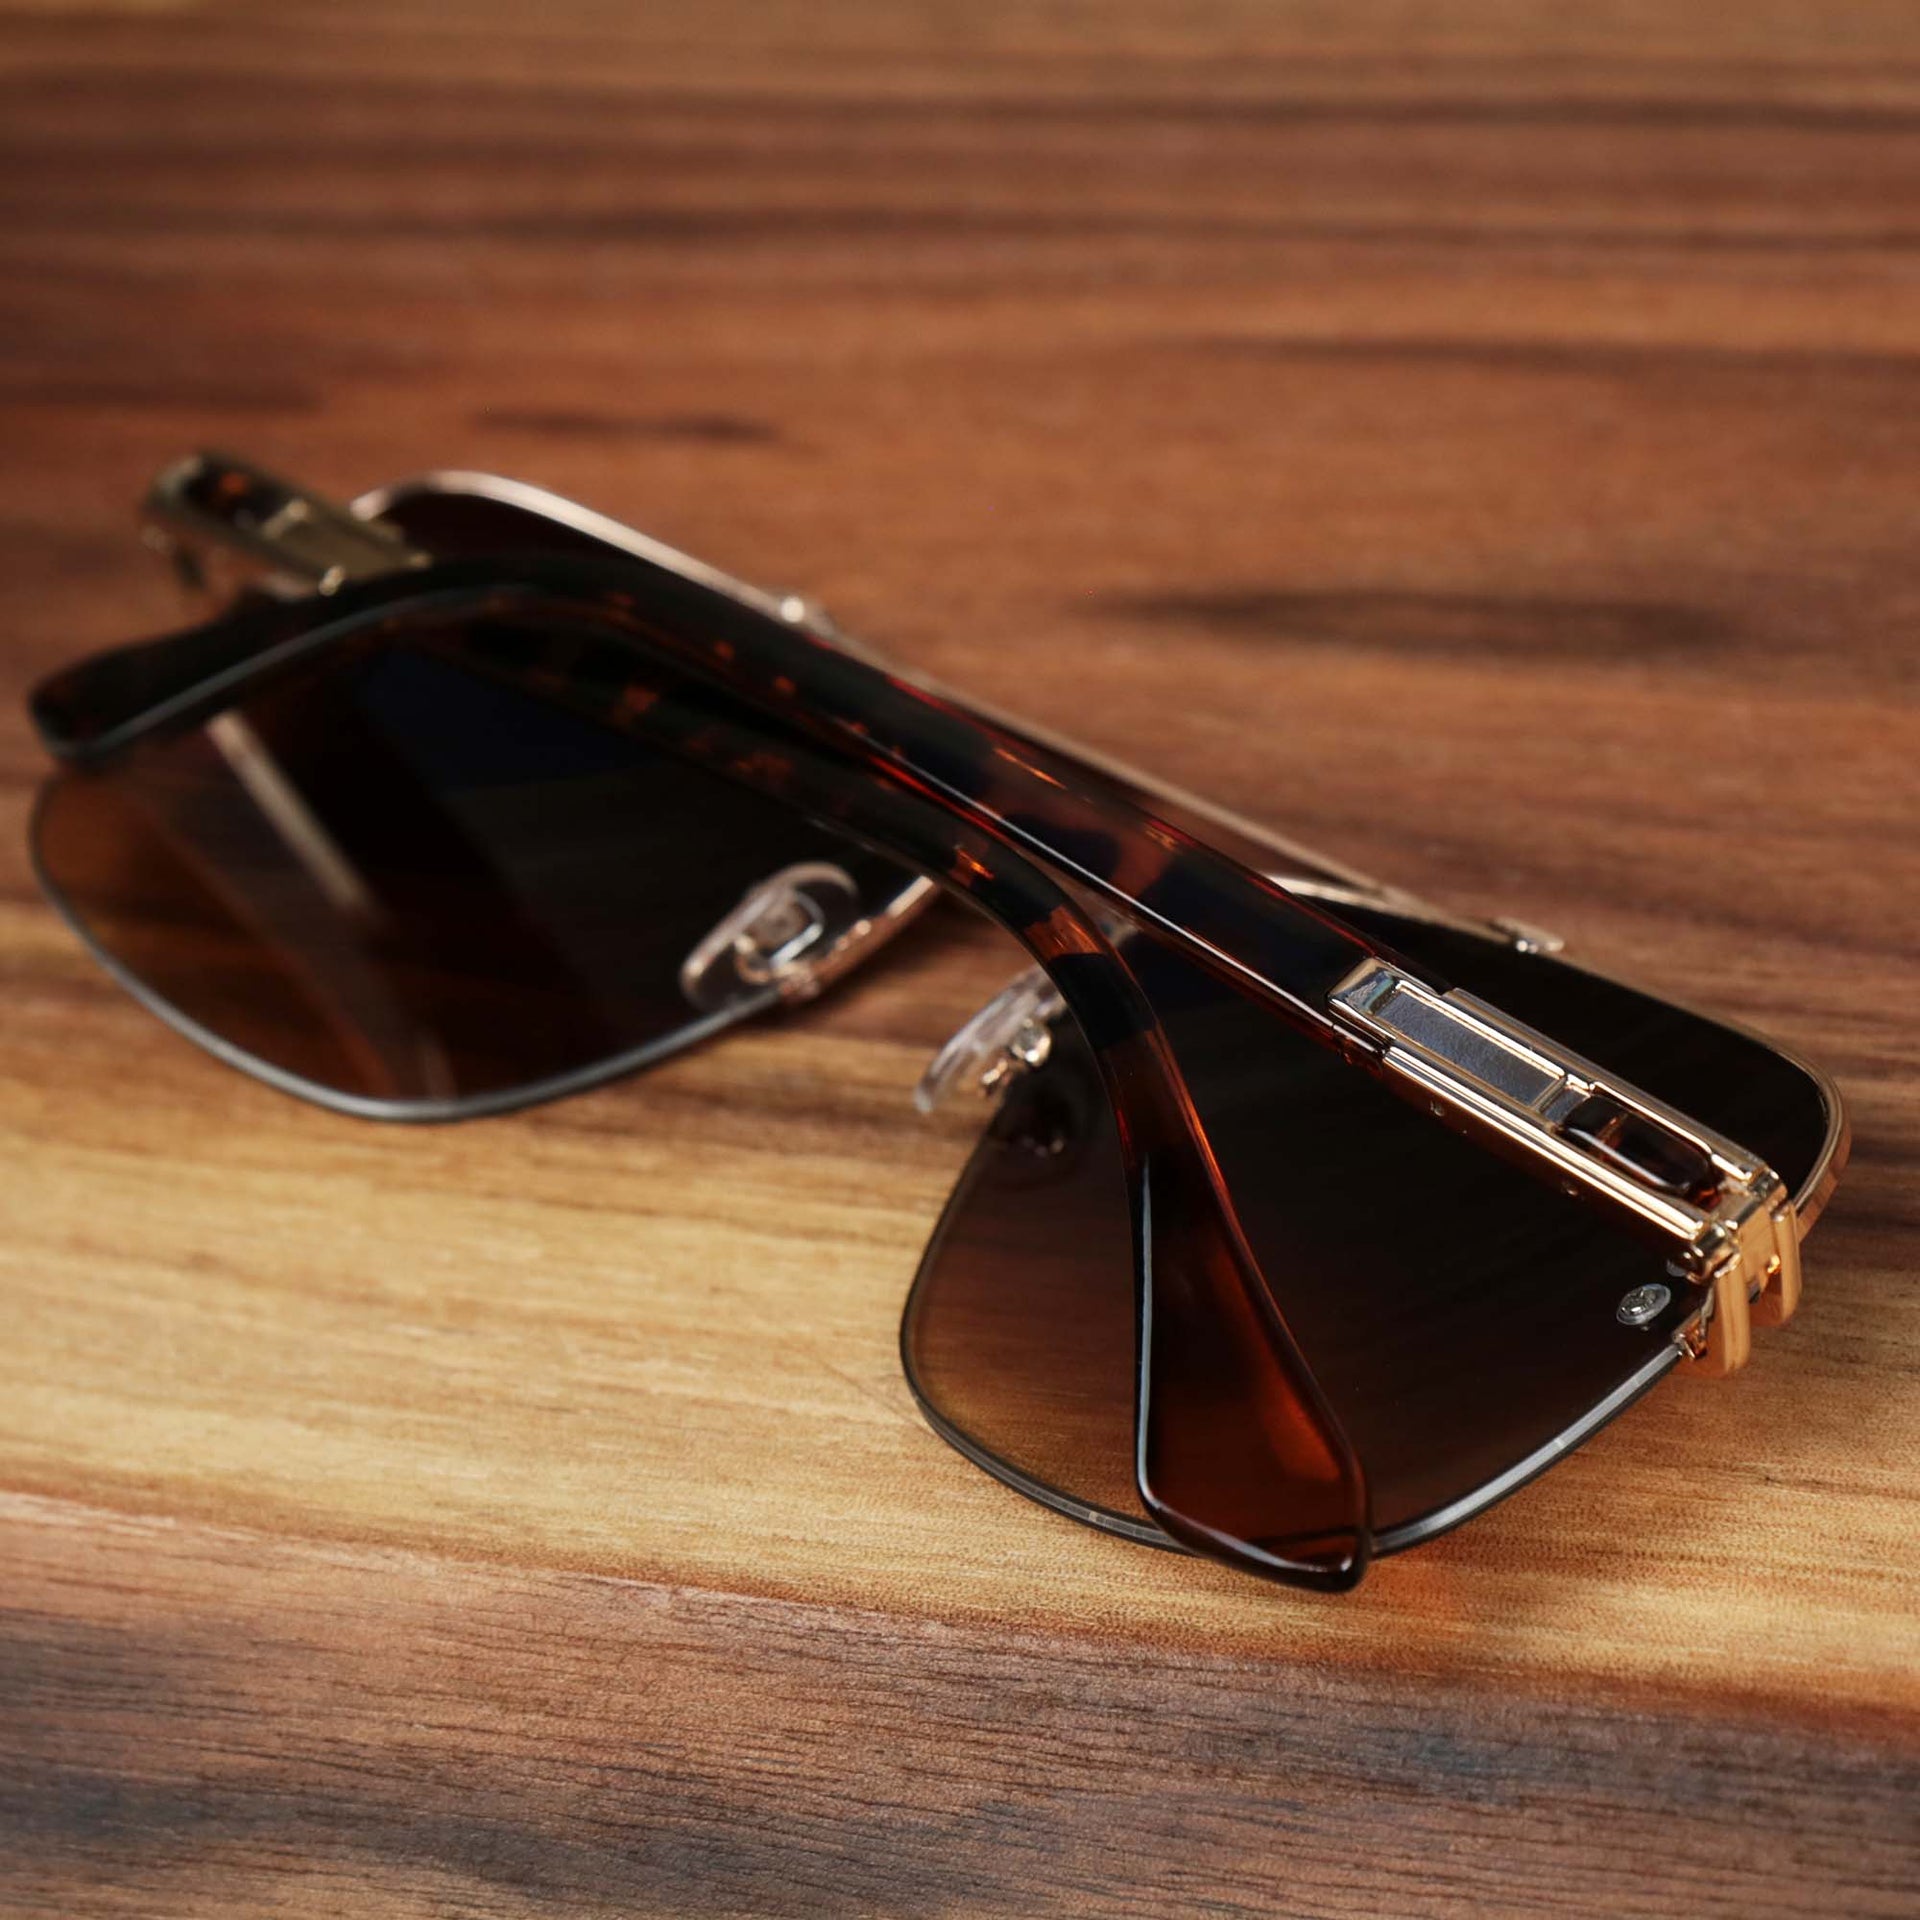 The Round Rectangle Frame Brown Lens Sunglasses with Rose Gold Tortoise Frame folded up